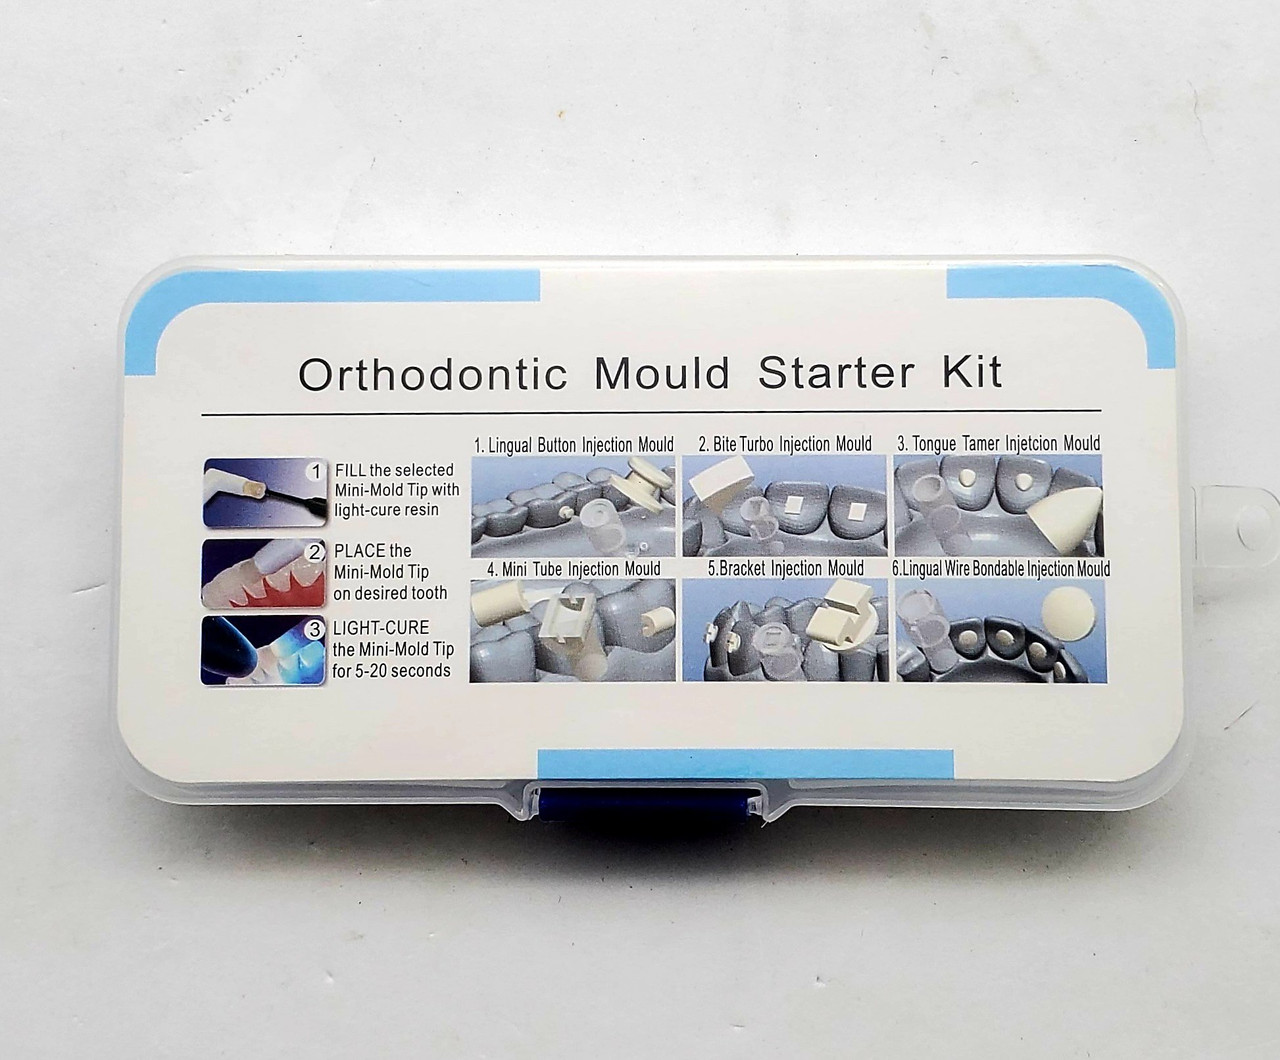 Orthodontic Quick Built  Kit for Bracket making, Fix Retainer, Wire Bonding, Lingual buttons, Tongue tamer,